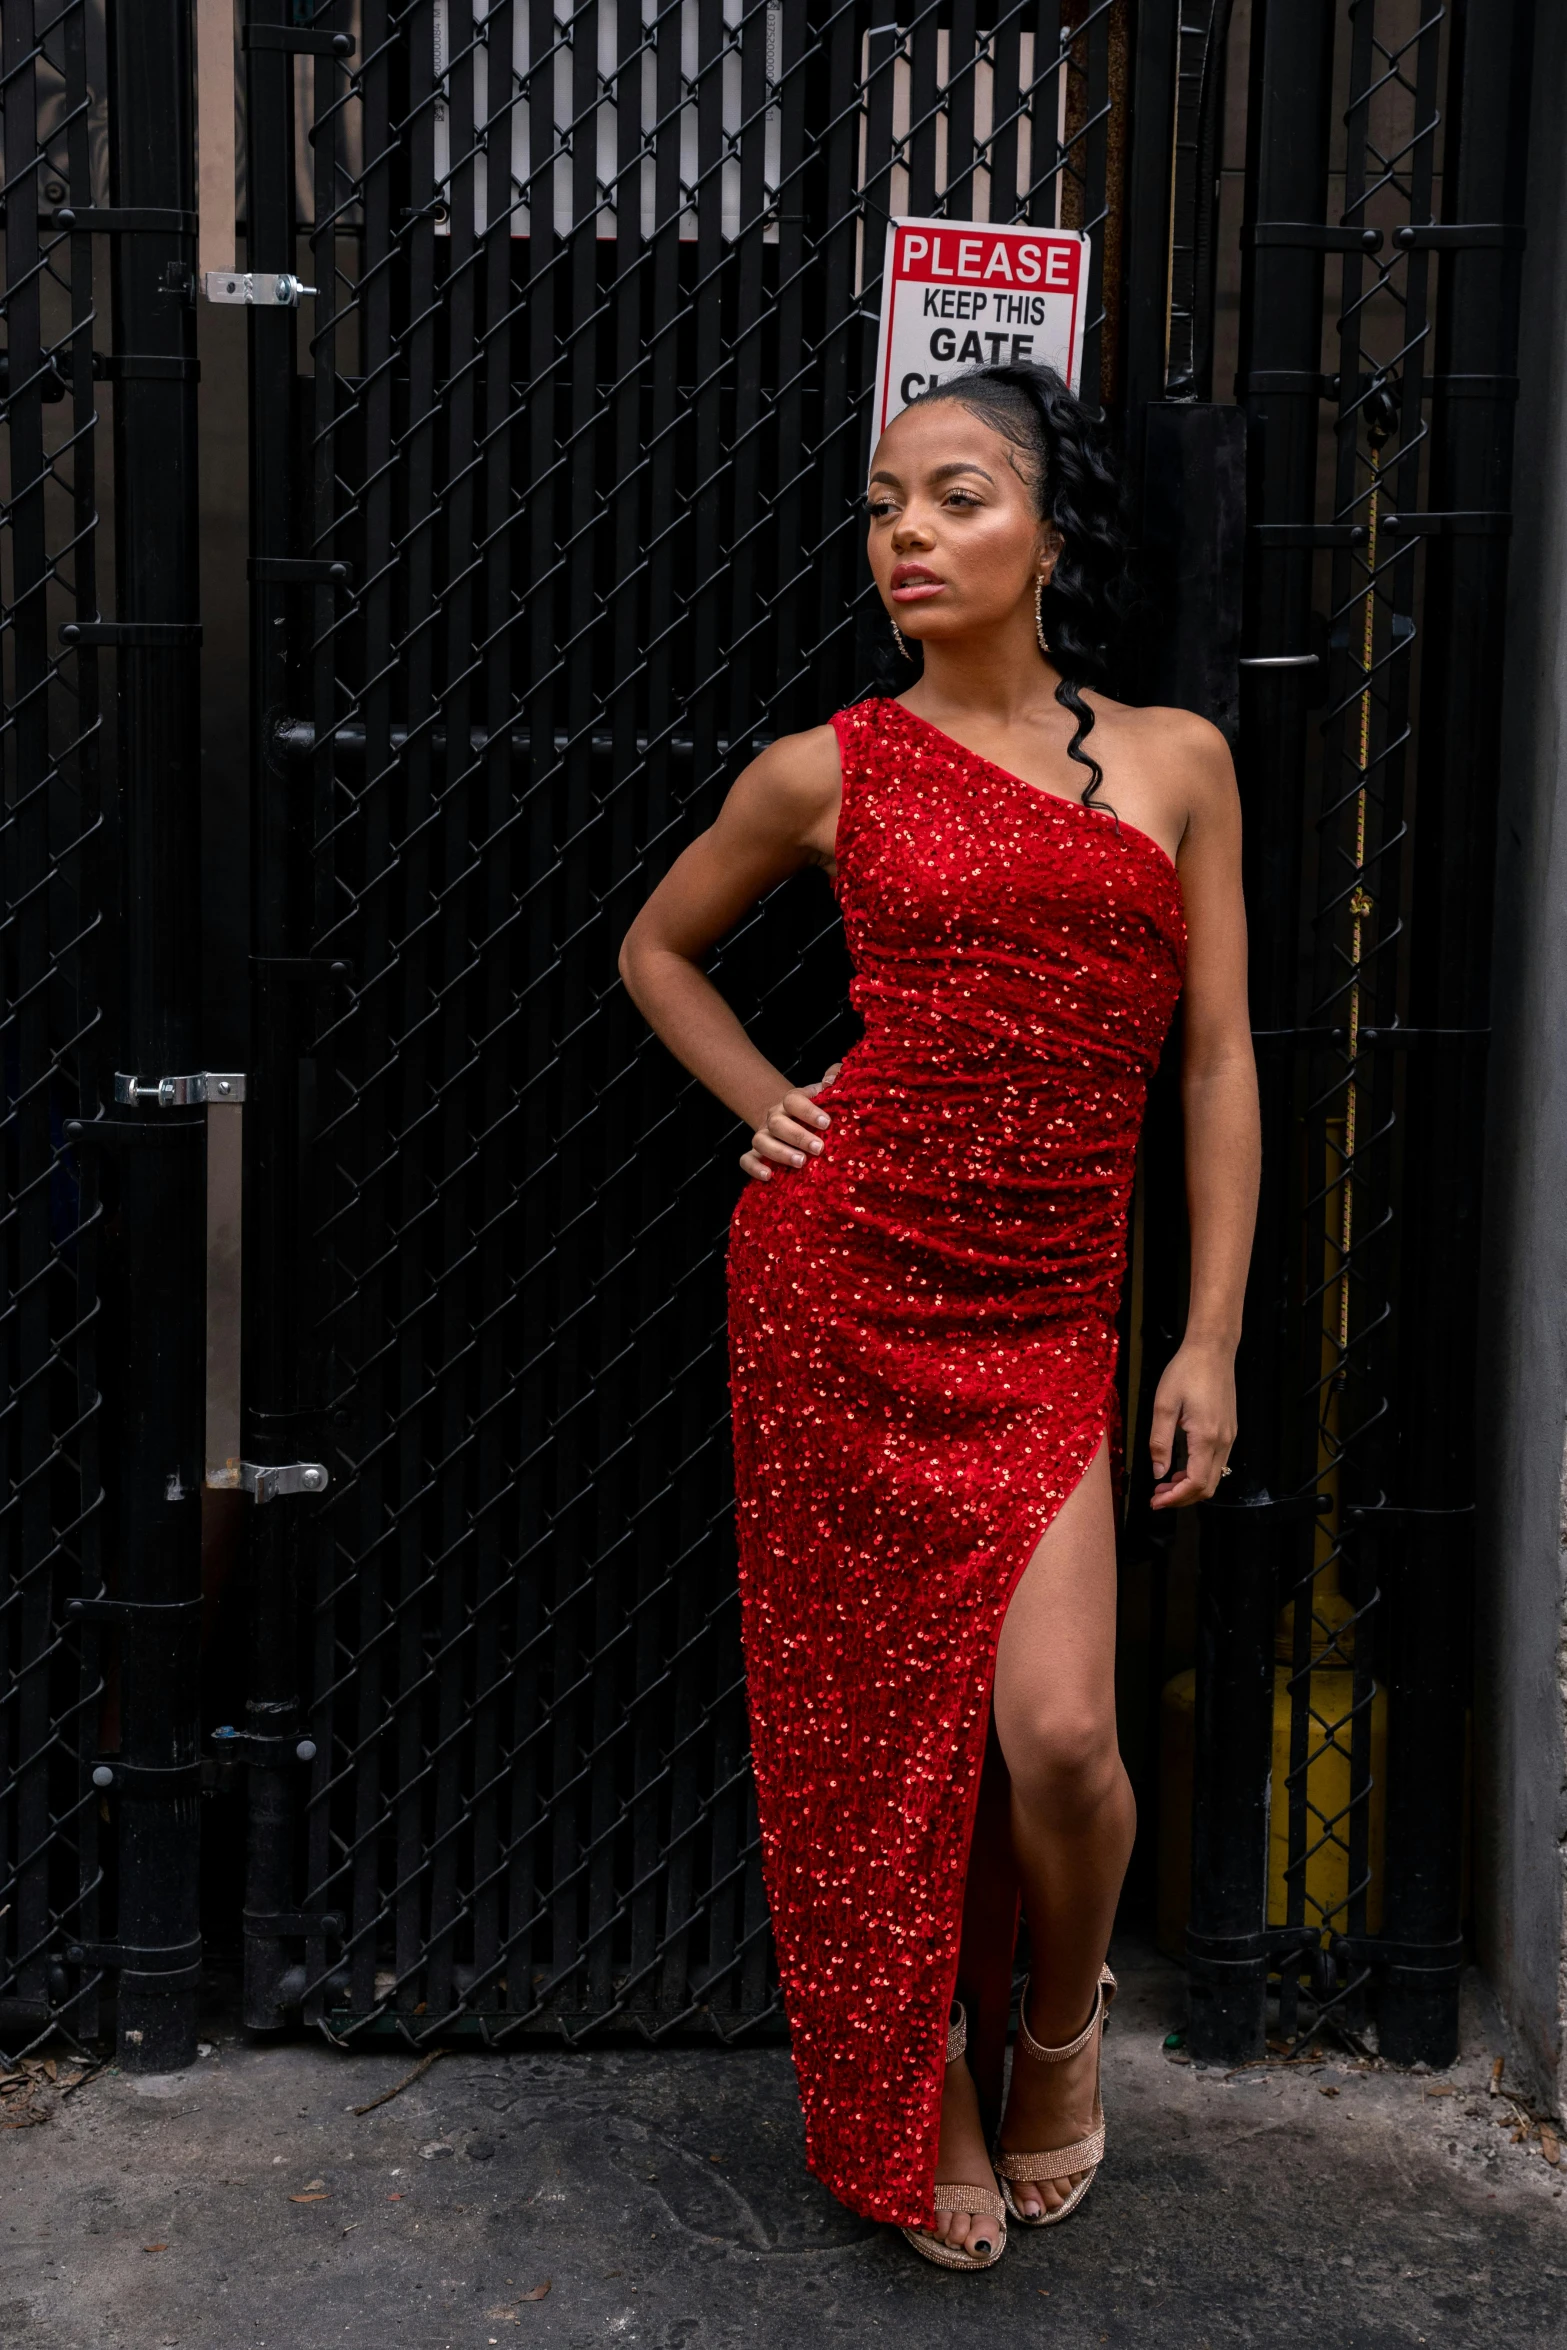 a woman standing next to a fence wearing a red dress